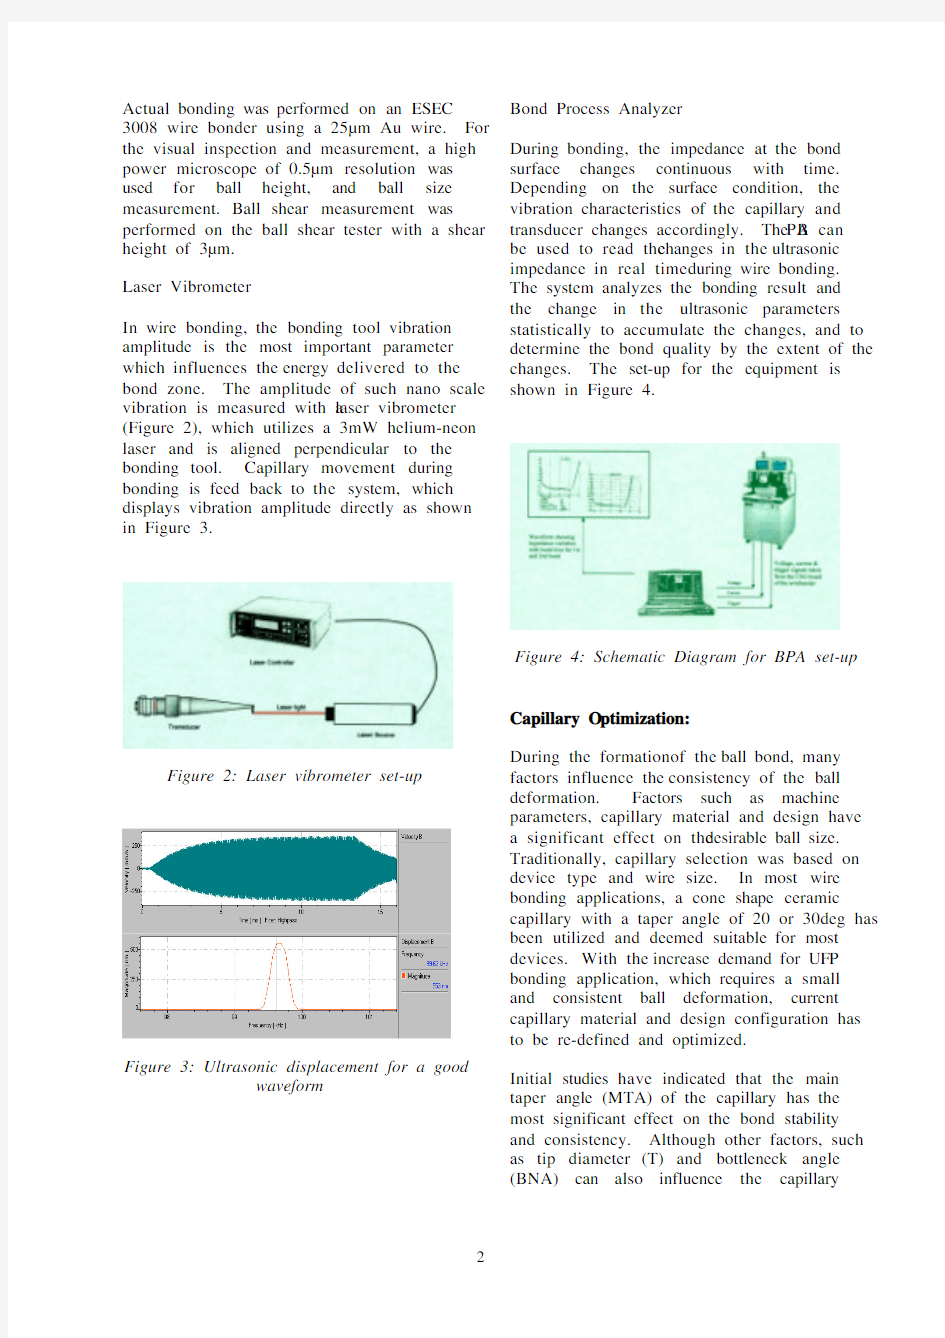 Closed Loop Study for Wire Bonding Process - Brochure - English